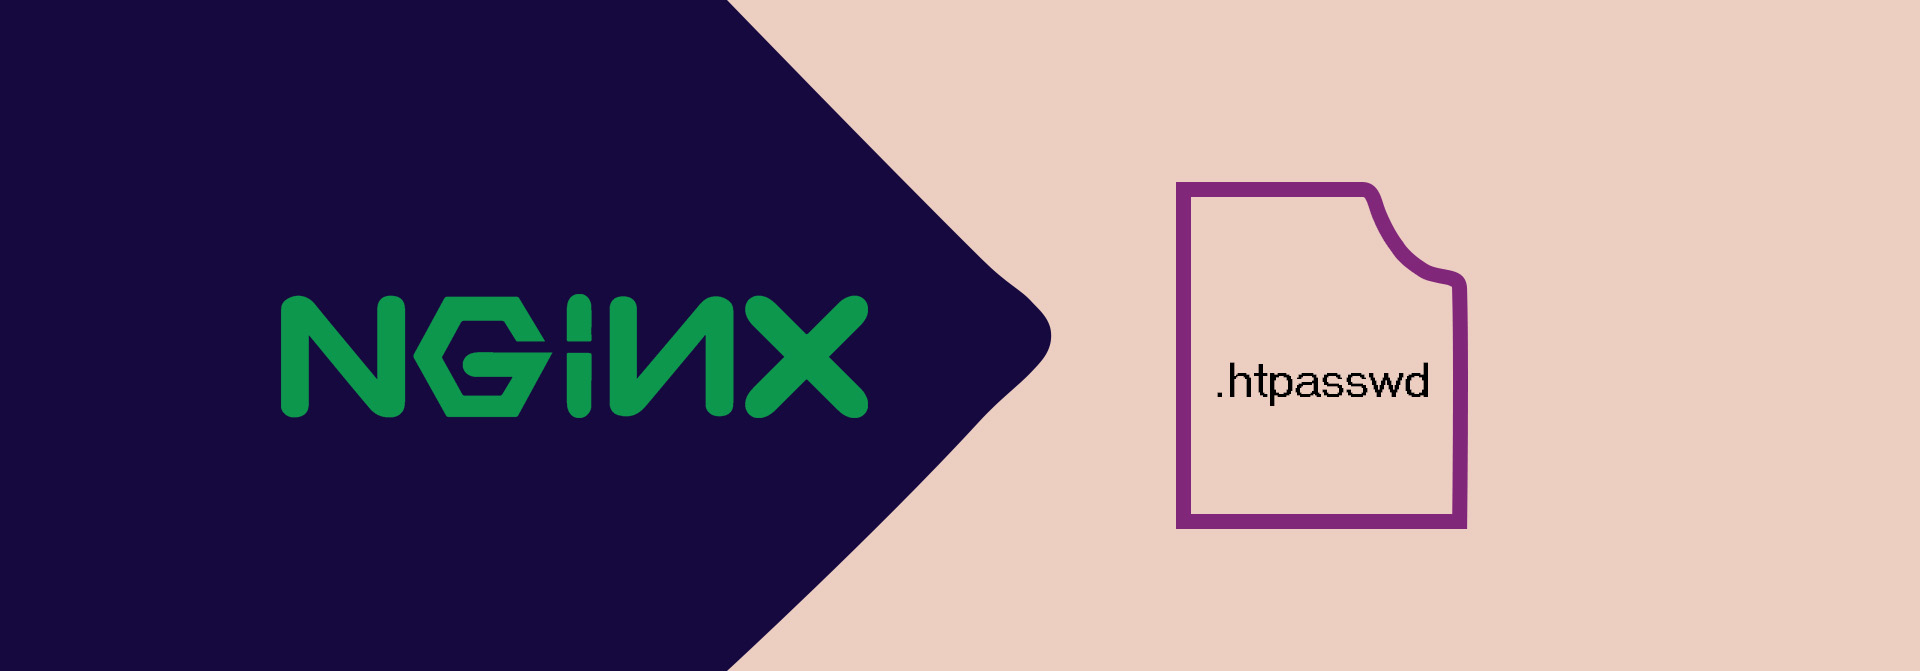 How To Use HTTP Basic Authentication With Nginx